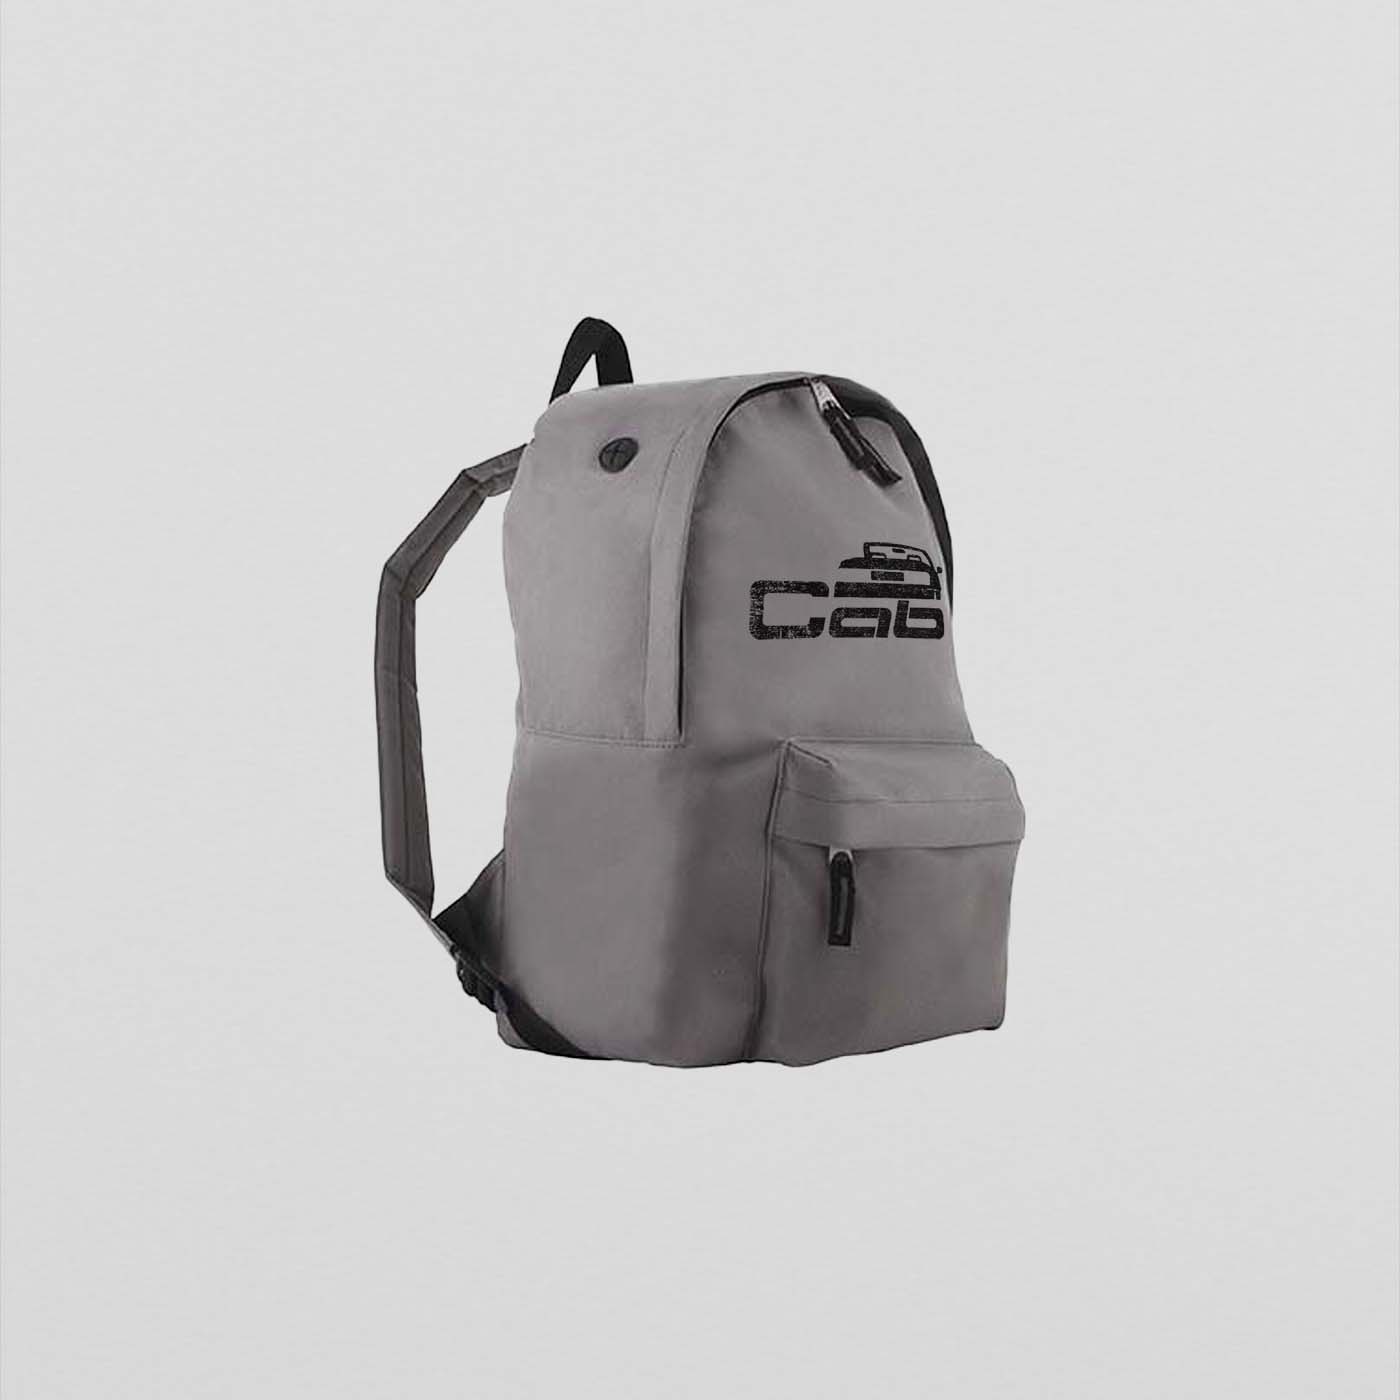 Backpack LowRider "Cab89" 